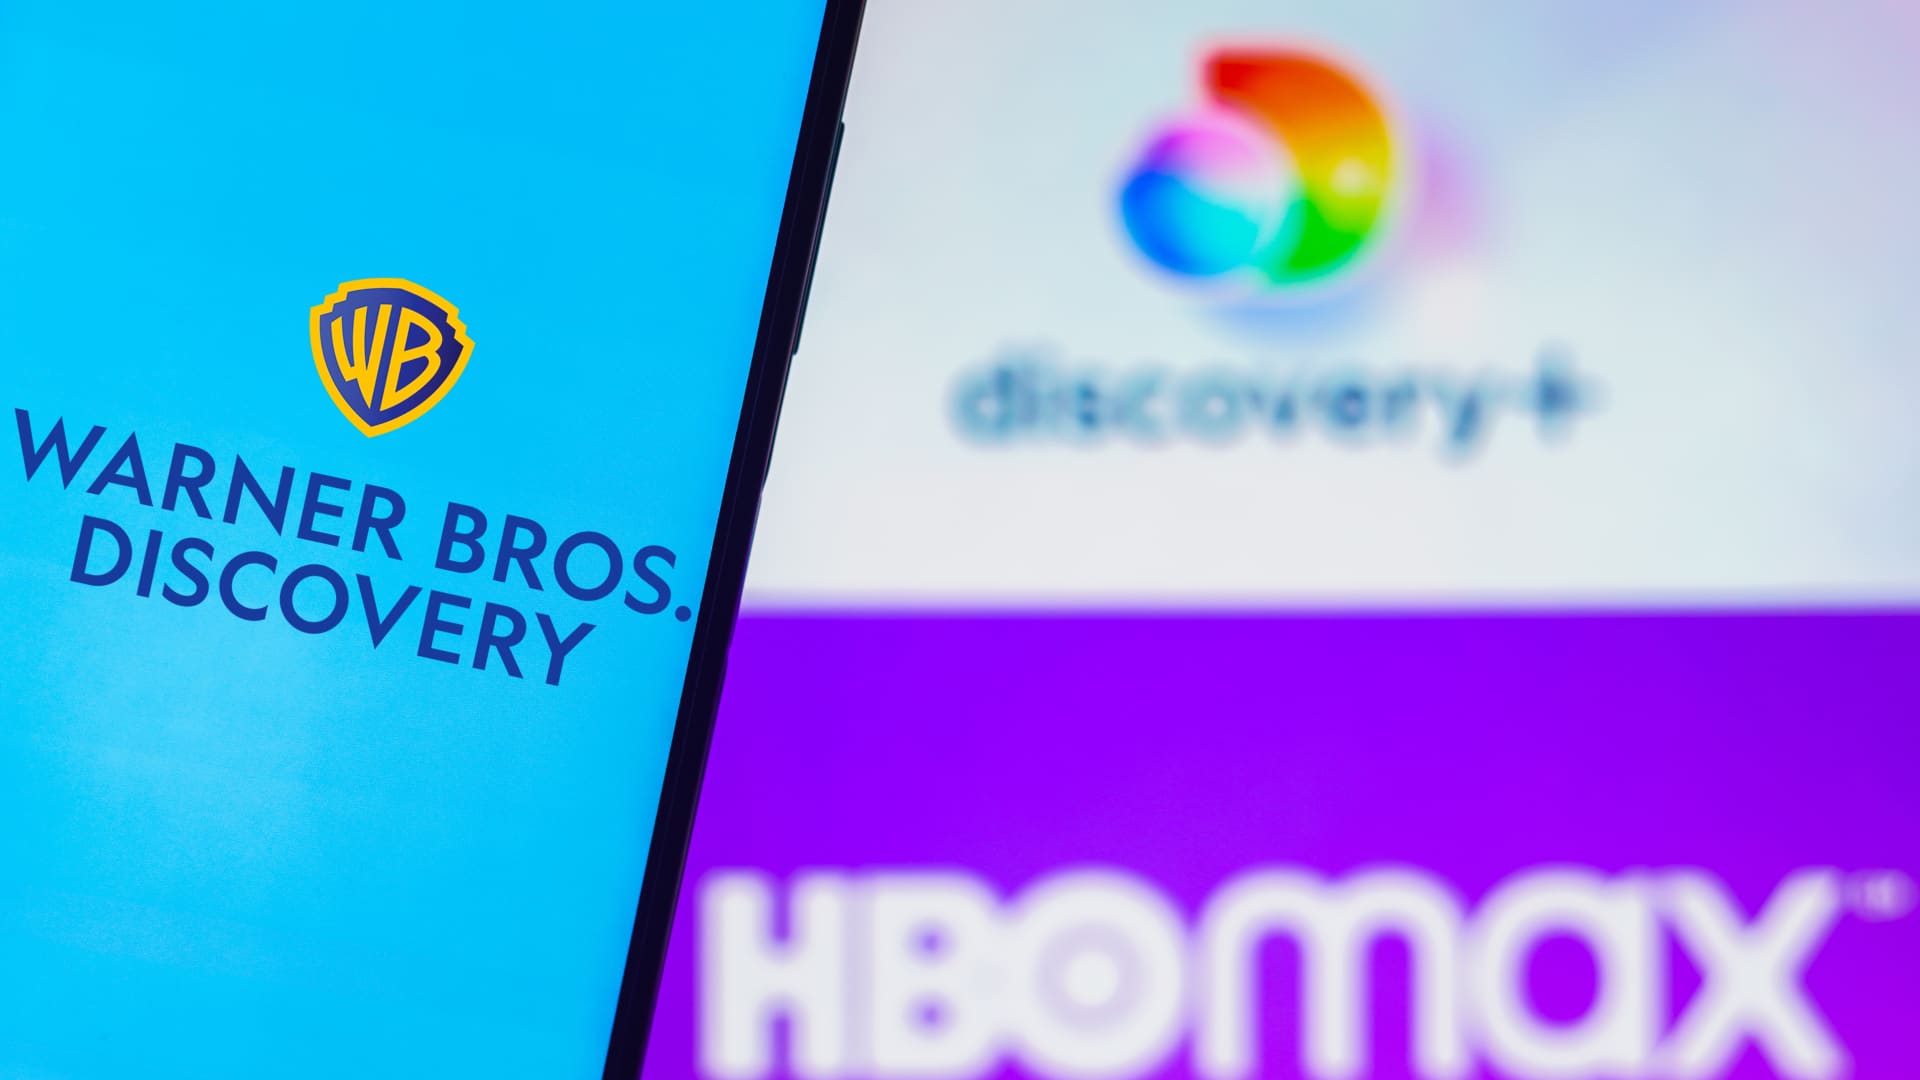 Warner Bros Discovery closes in on ‘Max’ as the name of its combined HBO Max-Discovery+ streaming service